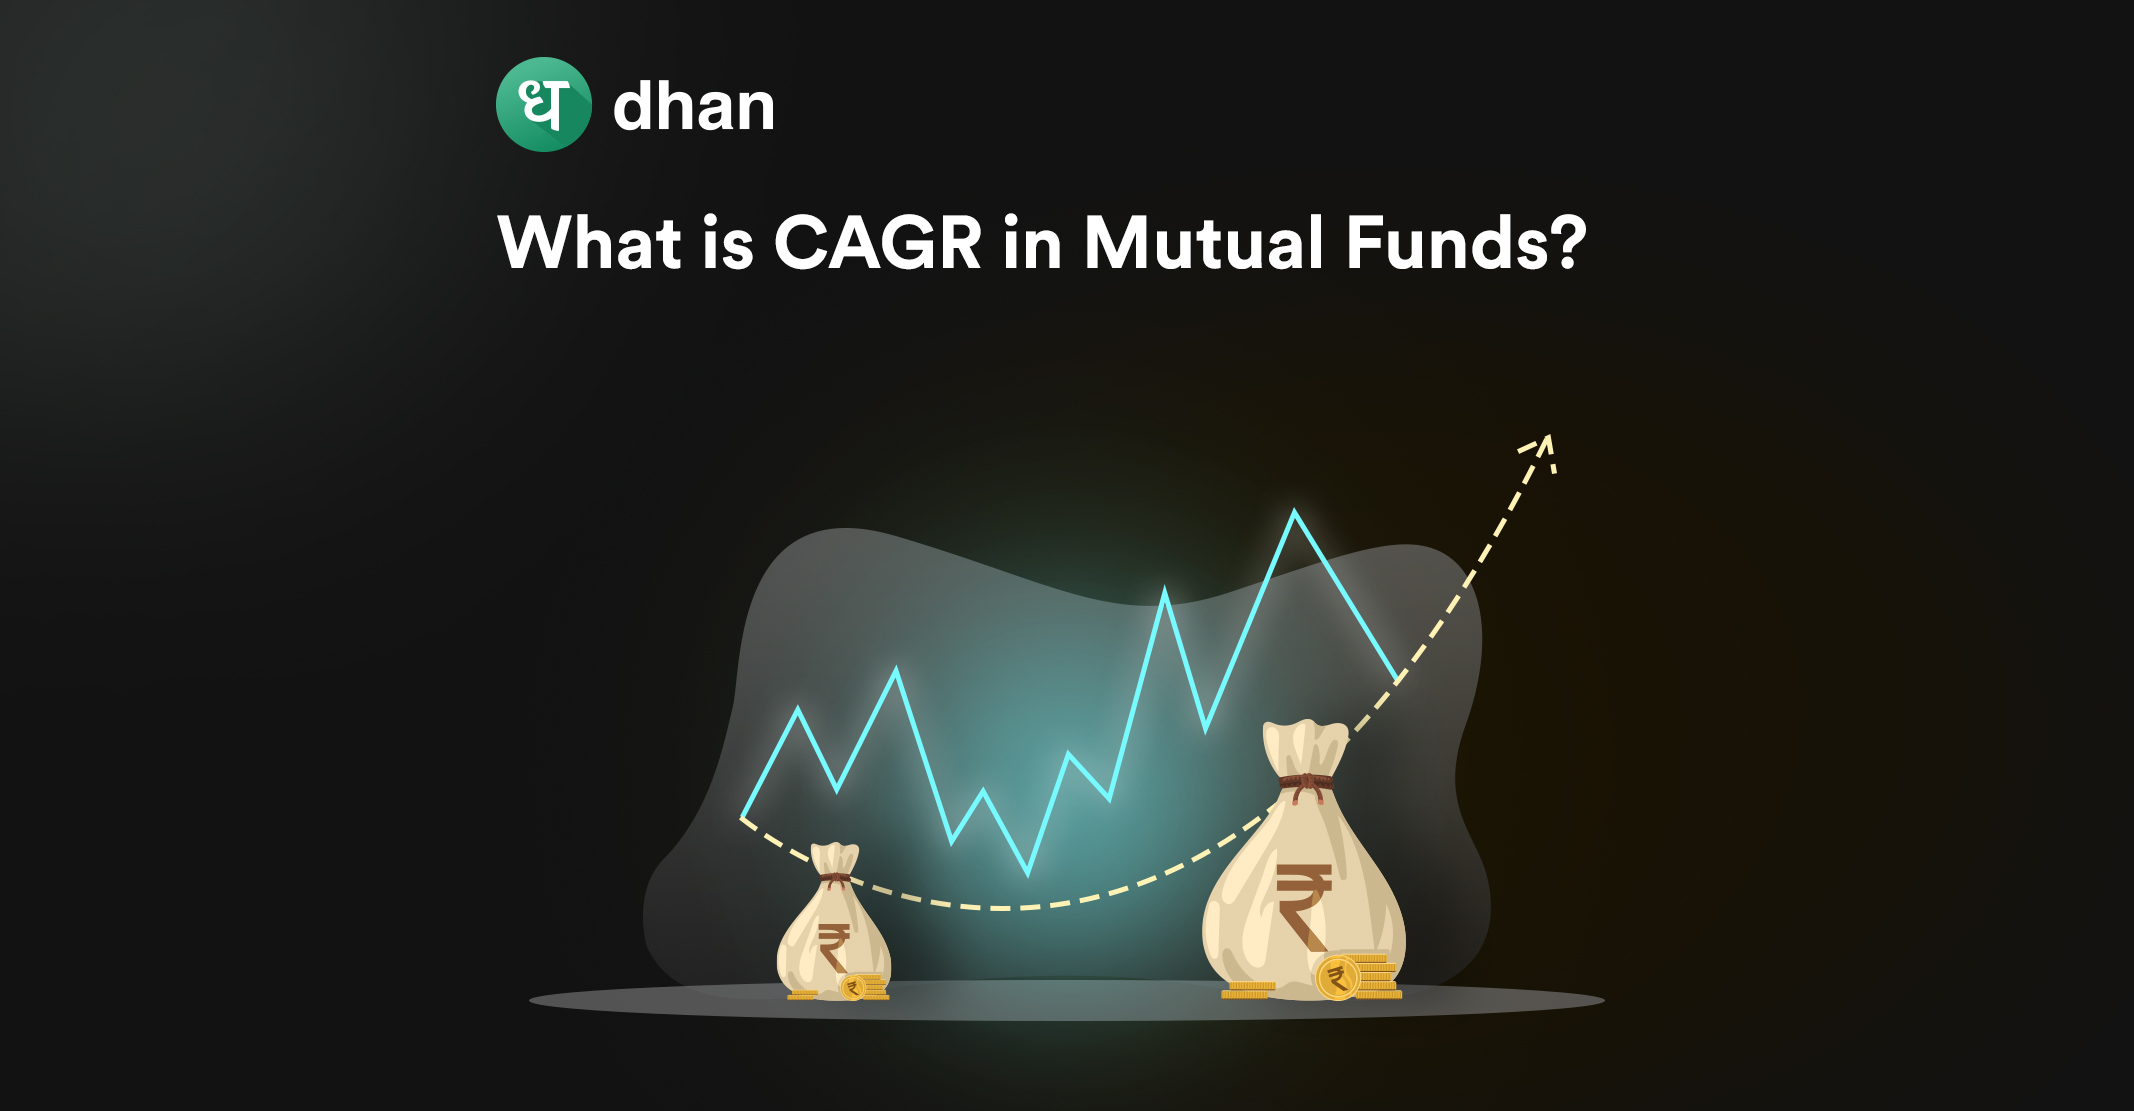 What is CAGR in Mutual Funds?